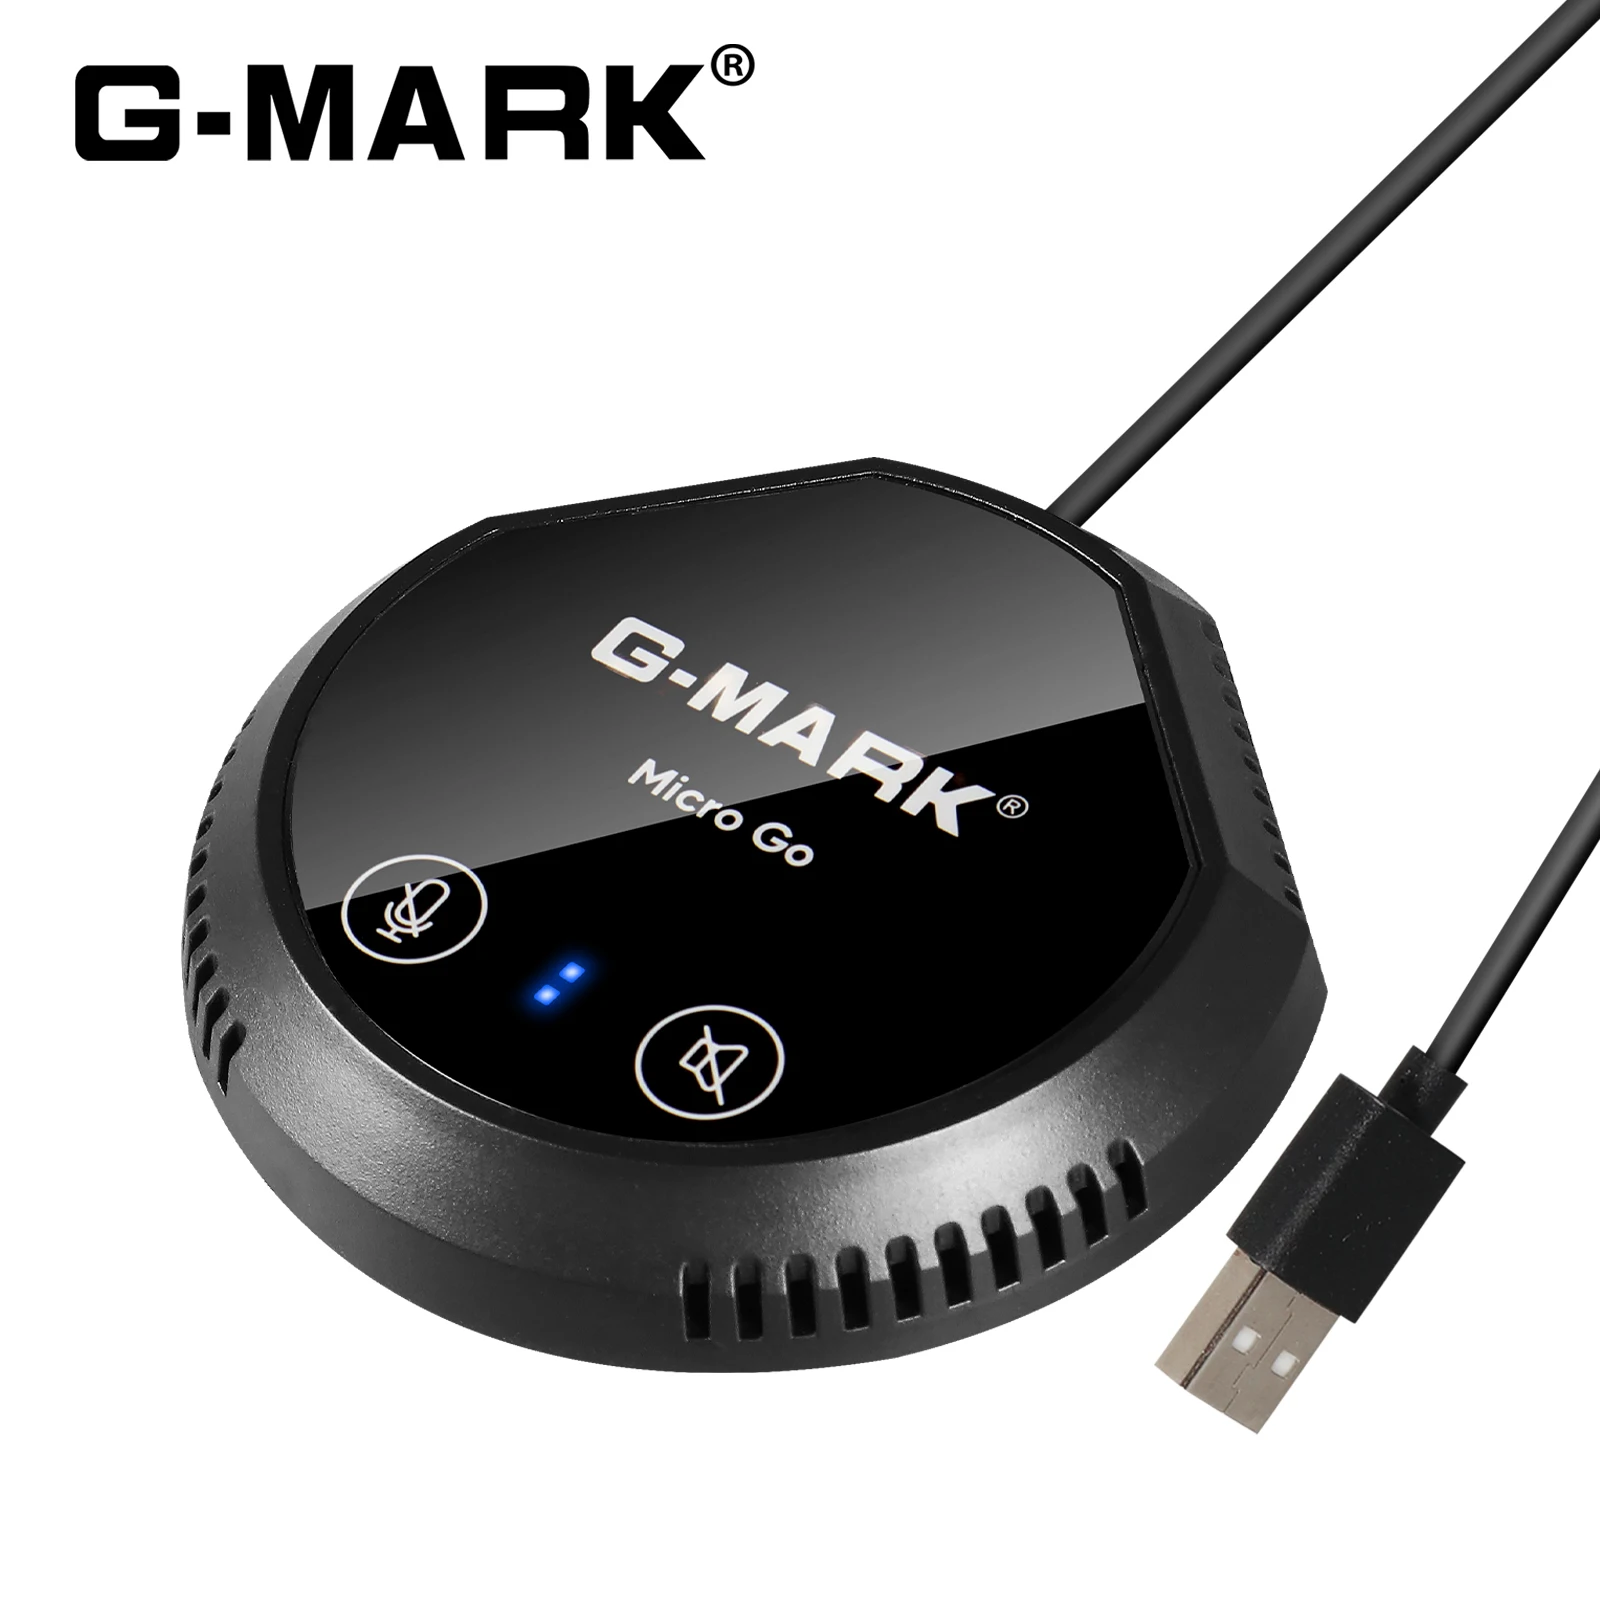 USB Speakers G-MARK Micro Go Bluetooth Conference Speakerphone with Microphone Compatible For Computer Plug and Plays